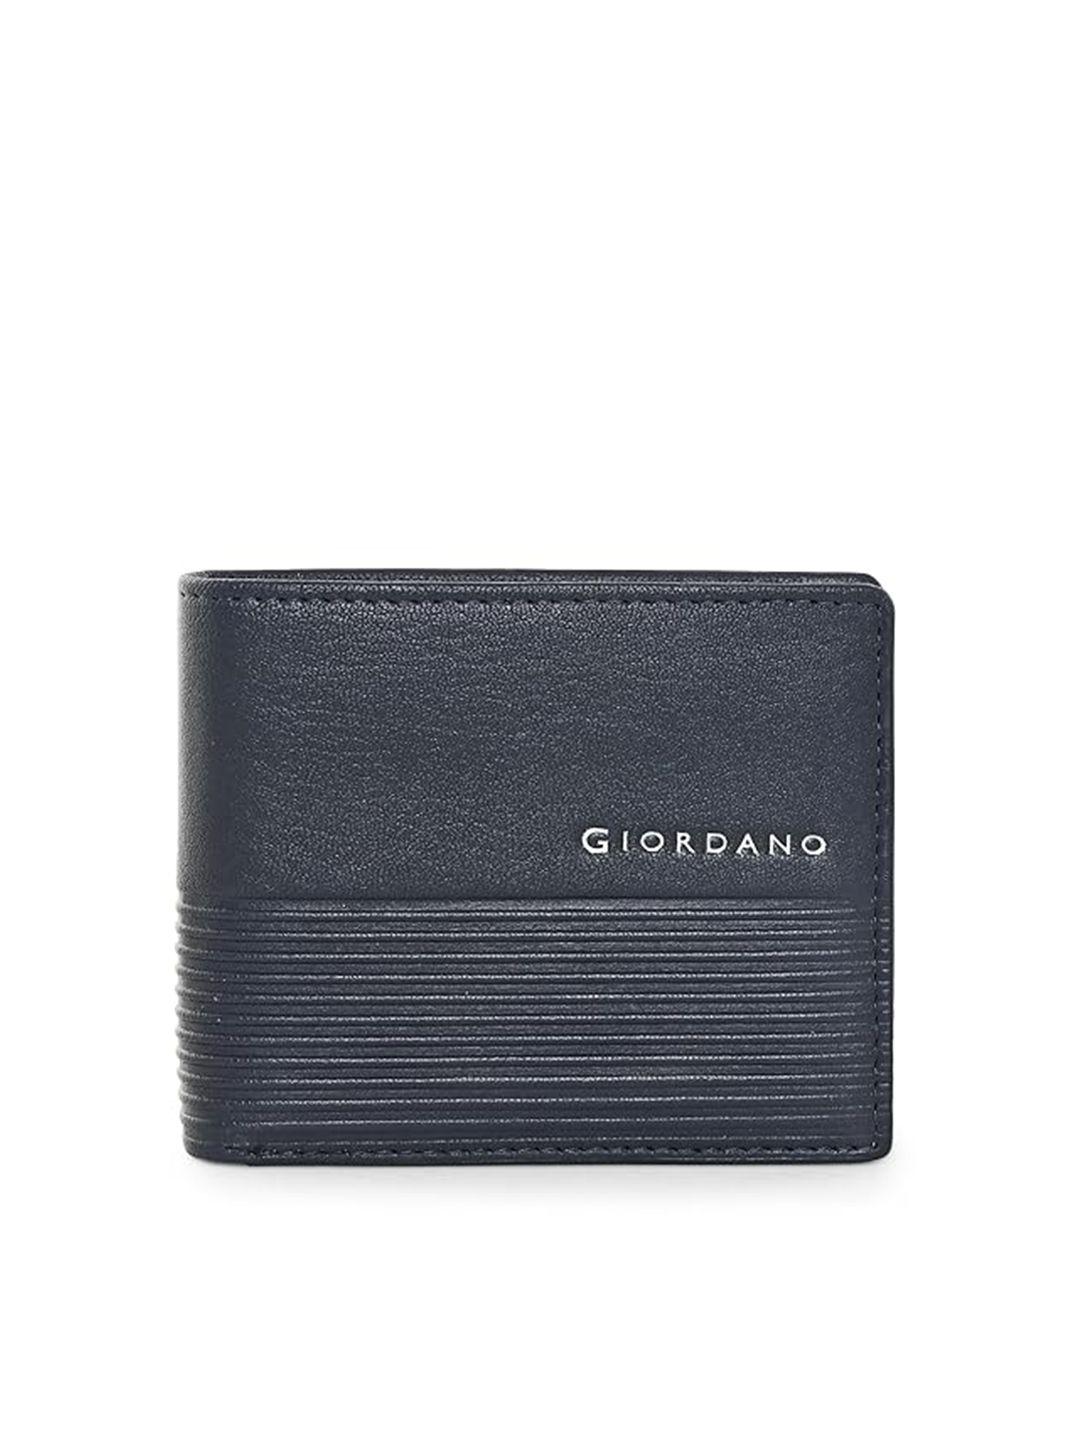 giordano leather two fold wallet